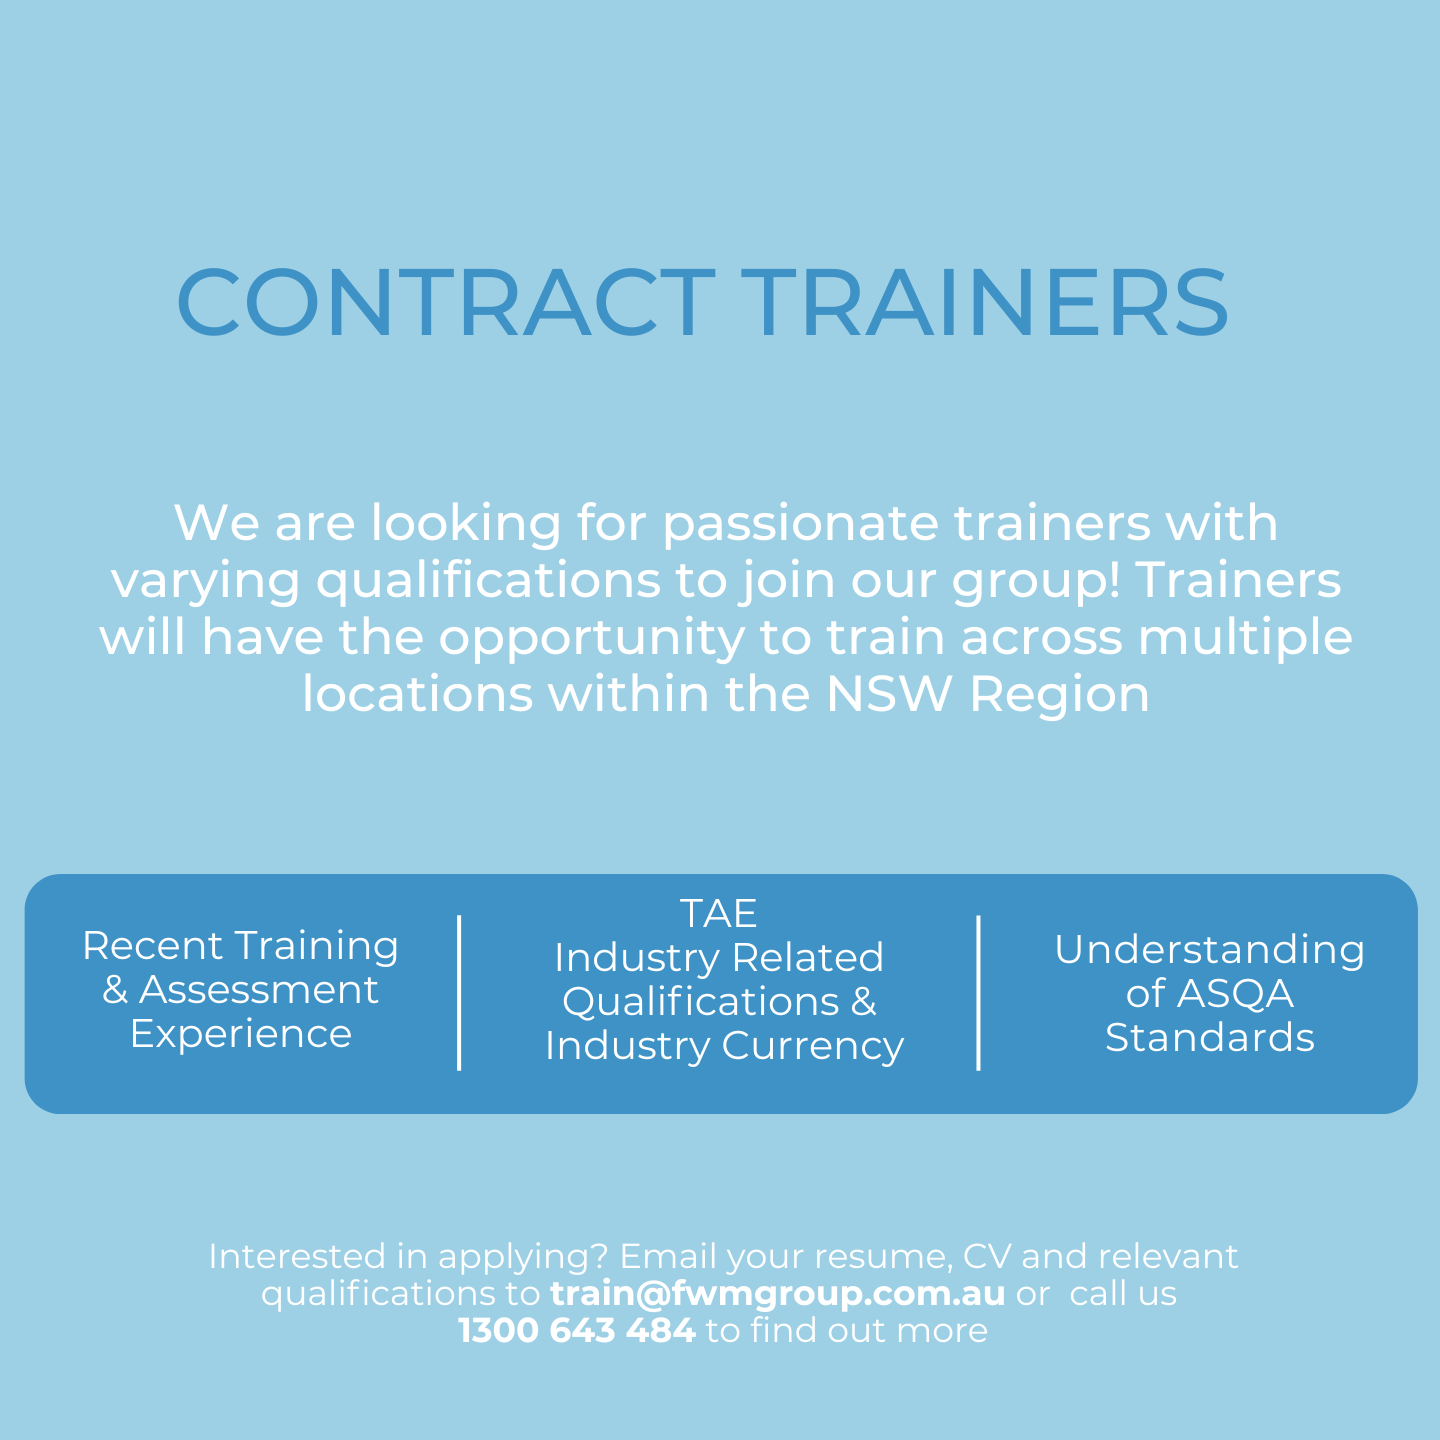 We are looking for passionate trainers with varying qualifications to join our group!